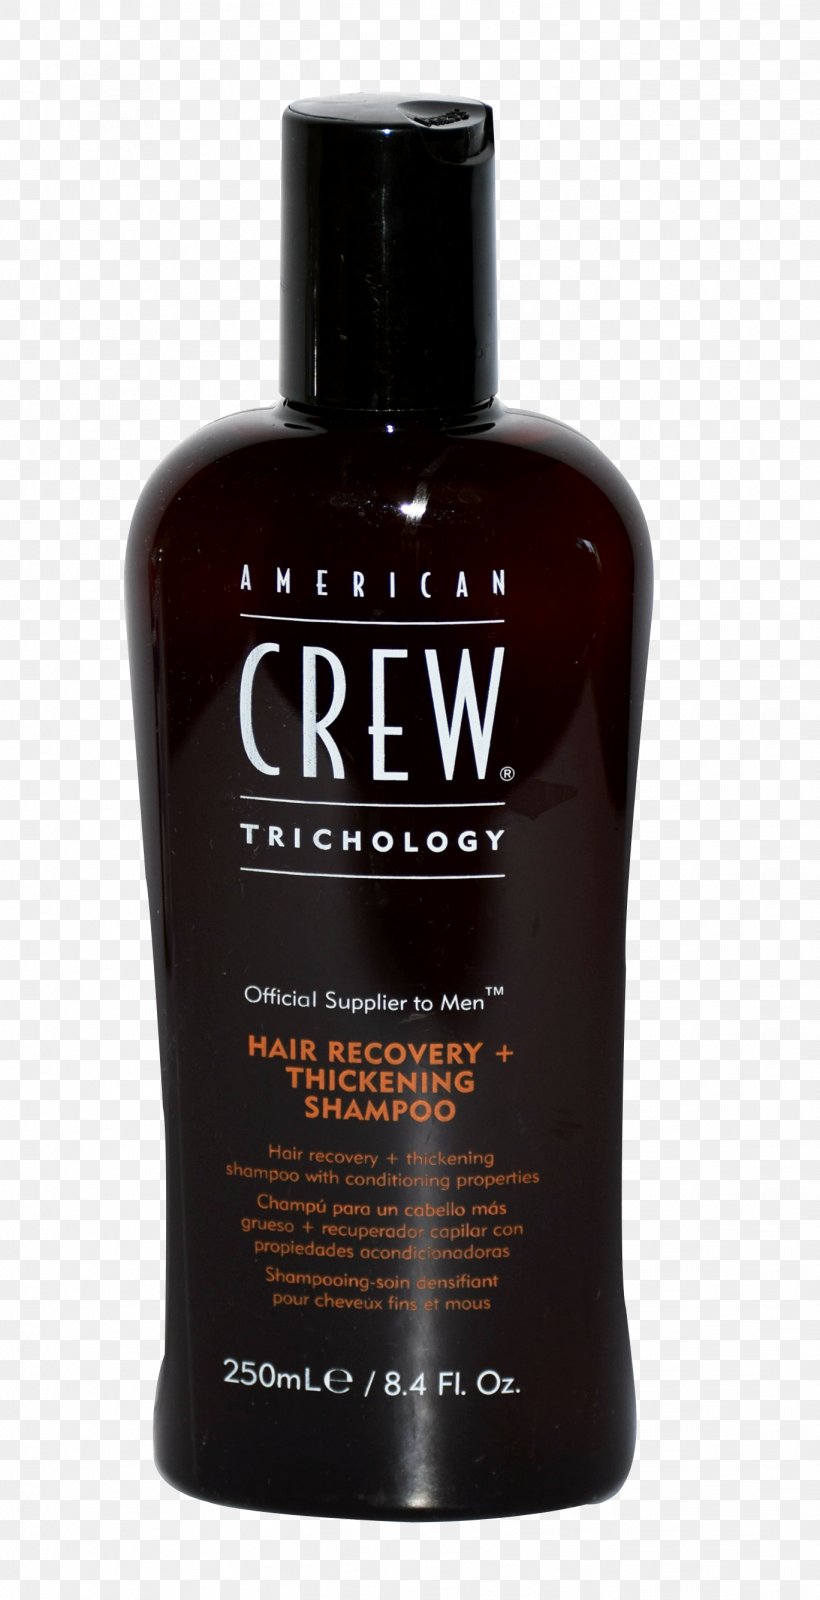 American Crew 3-IN-1 American Crew Daily Moisturizing Shampoo Hair Conditioner, PNG, 1368x2670px, American Crew, American Crew Daily Conditioner, American Crew Forming Cream, Cosmetics, Hair Care Download Free